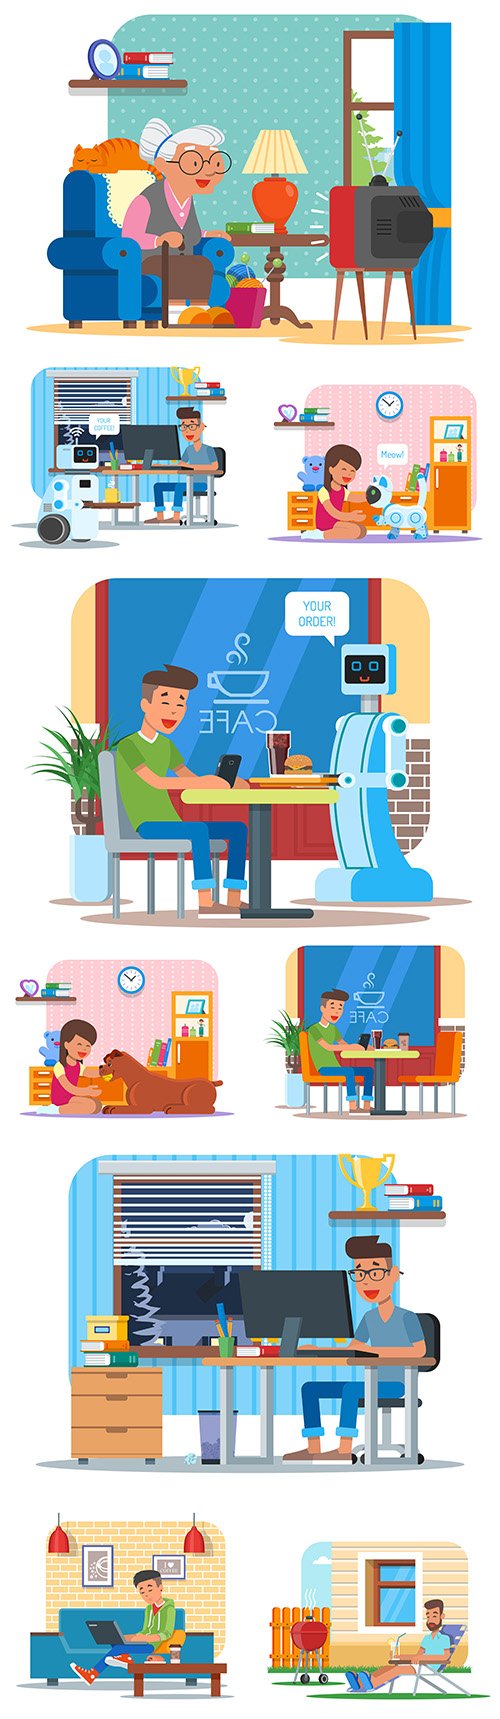 People in home setting illustration flat design